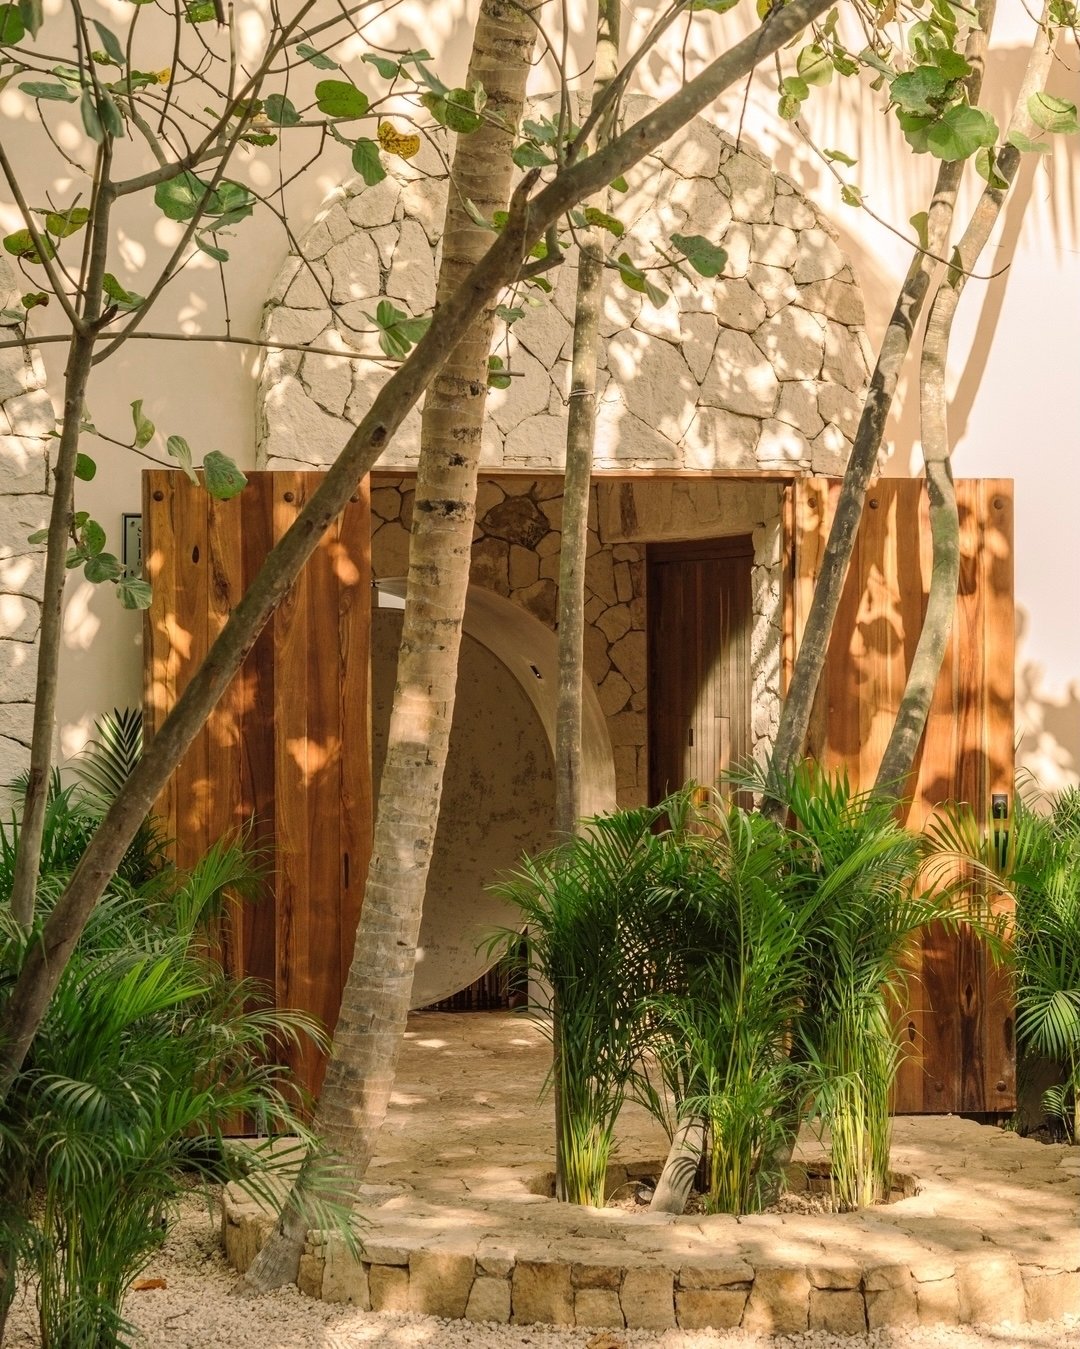 La Valise Jungle is Tulum's hidden gem, a secluded enclave just across the street from our beach property, yet a world entirely unto itself. Here, guests revel in privacy within the lush embrace of the jungle.

La Valise Jungle es la joya oculta de T